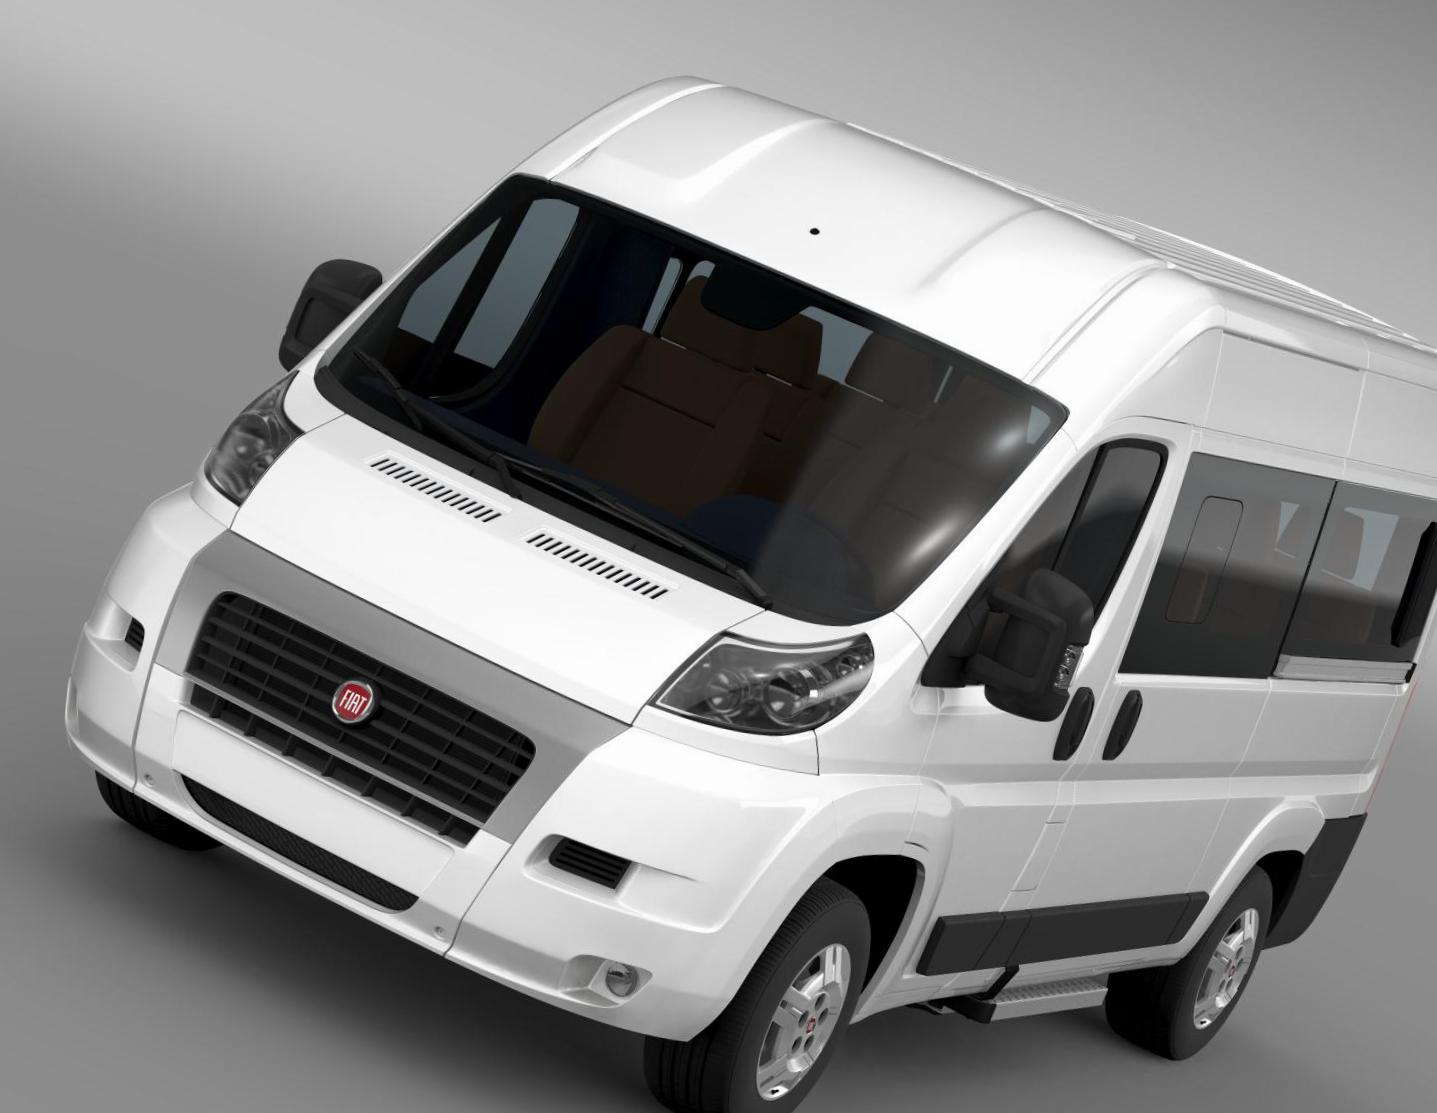 Fiat Ducato Panorama approved 2007